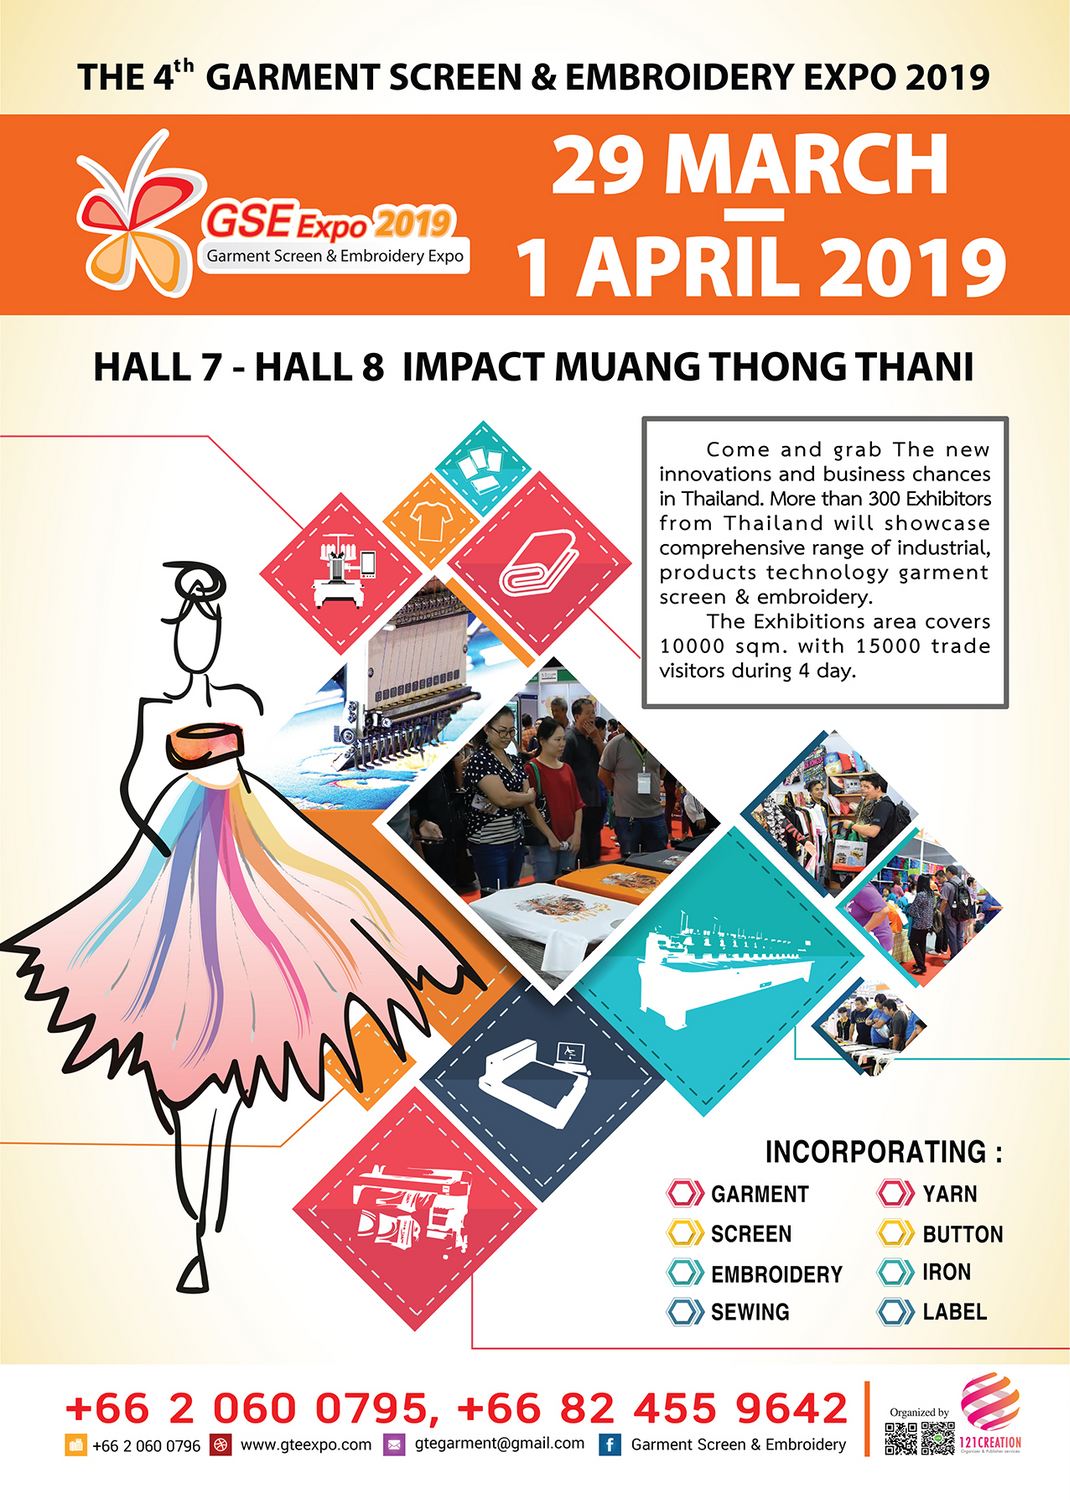 The 4th Garment & Textile Embroidery Expo 2019